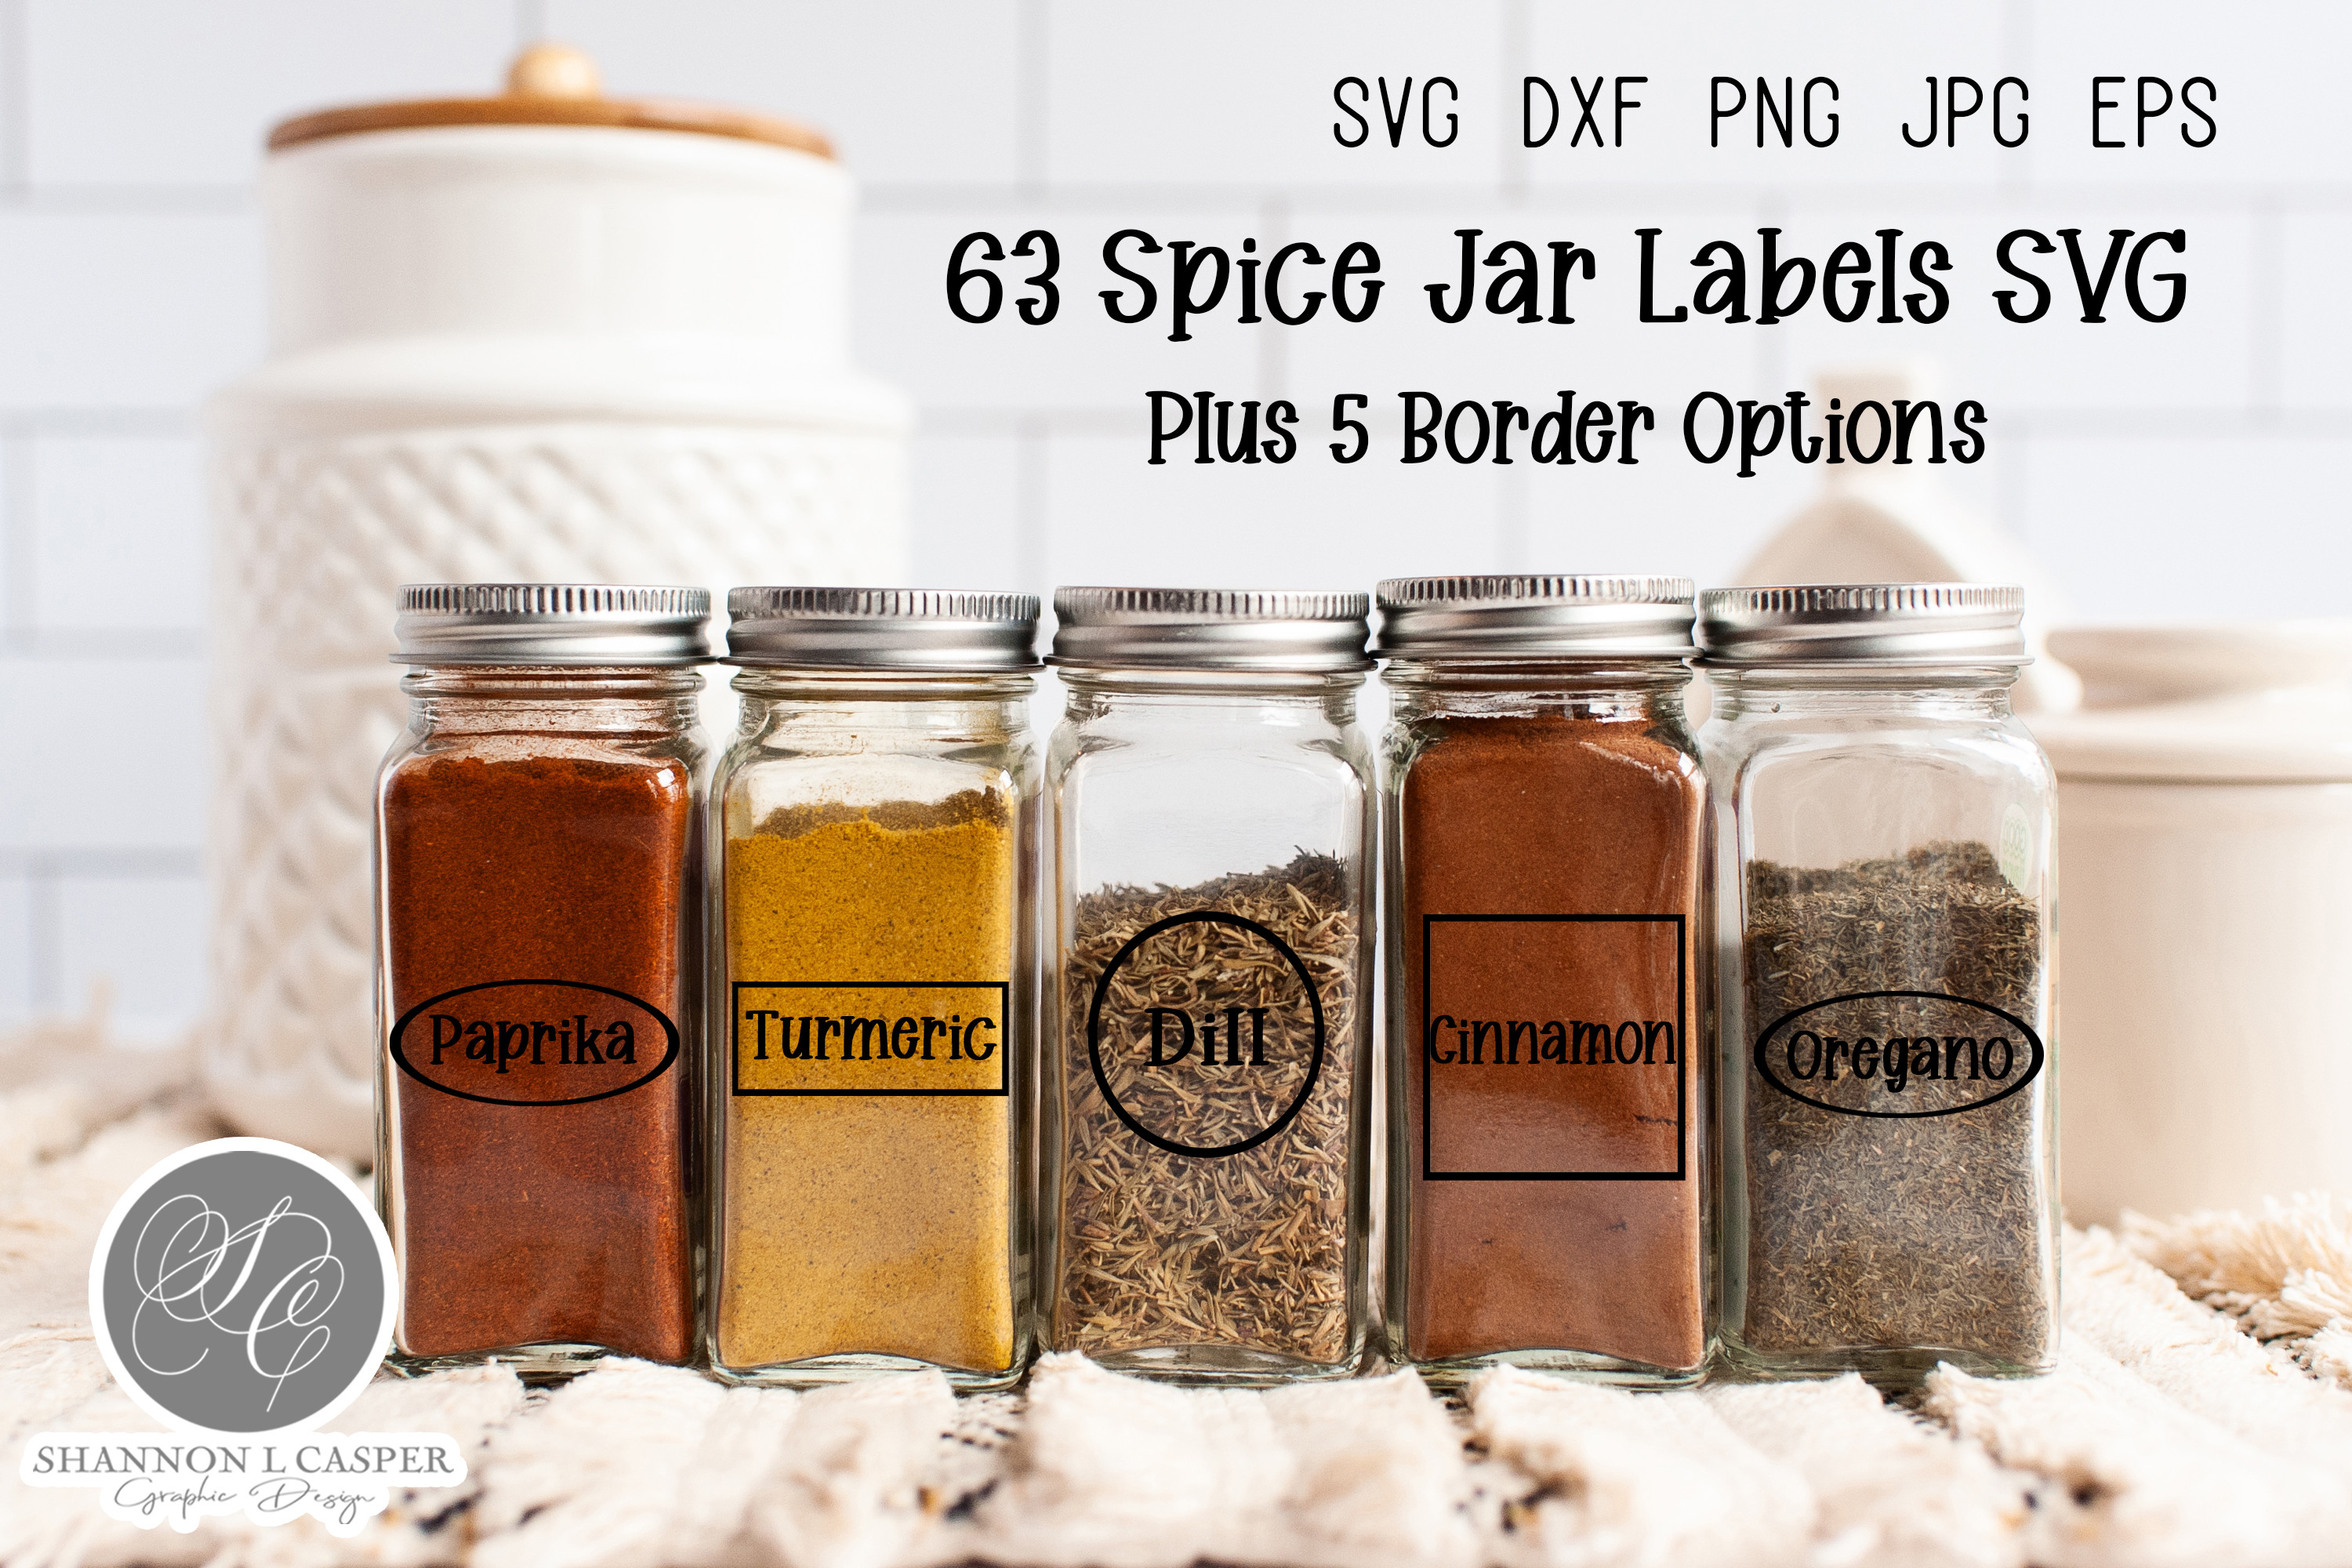 https://www.creativefabrica.com/wp-content/uploads/2021/06/17/Kitchen-Pantry-Spice-Labels-with-Borders-Graphics-13539939-1.jpg